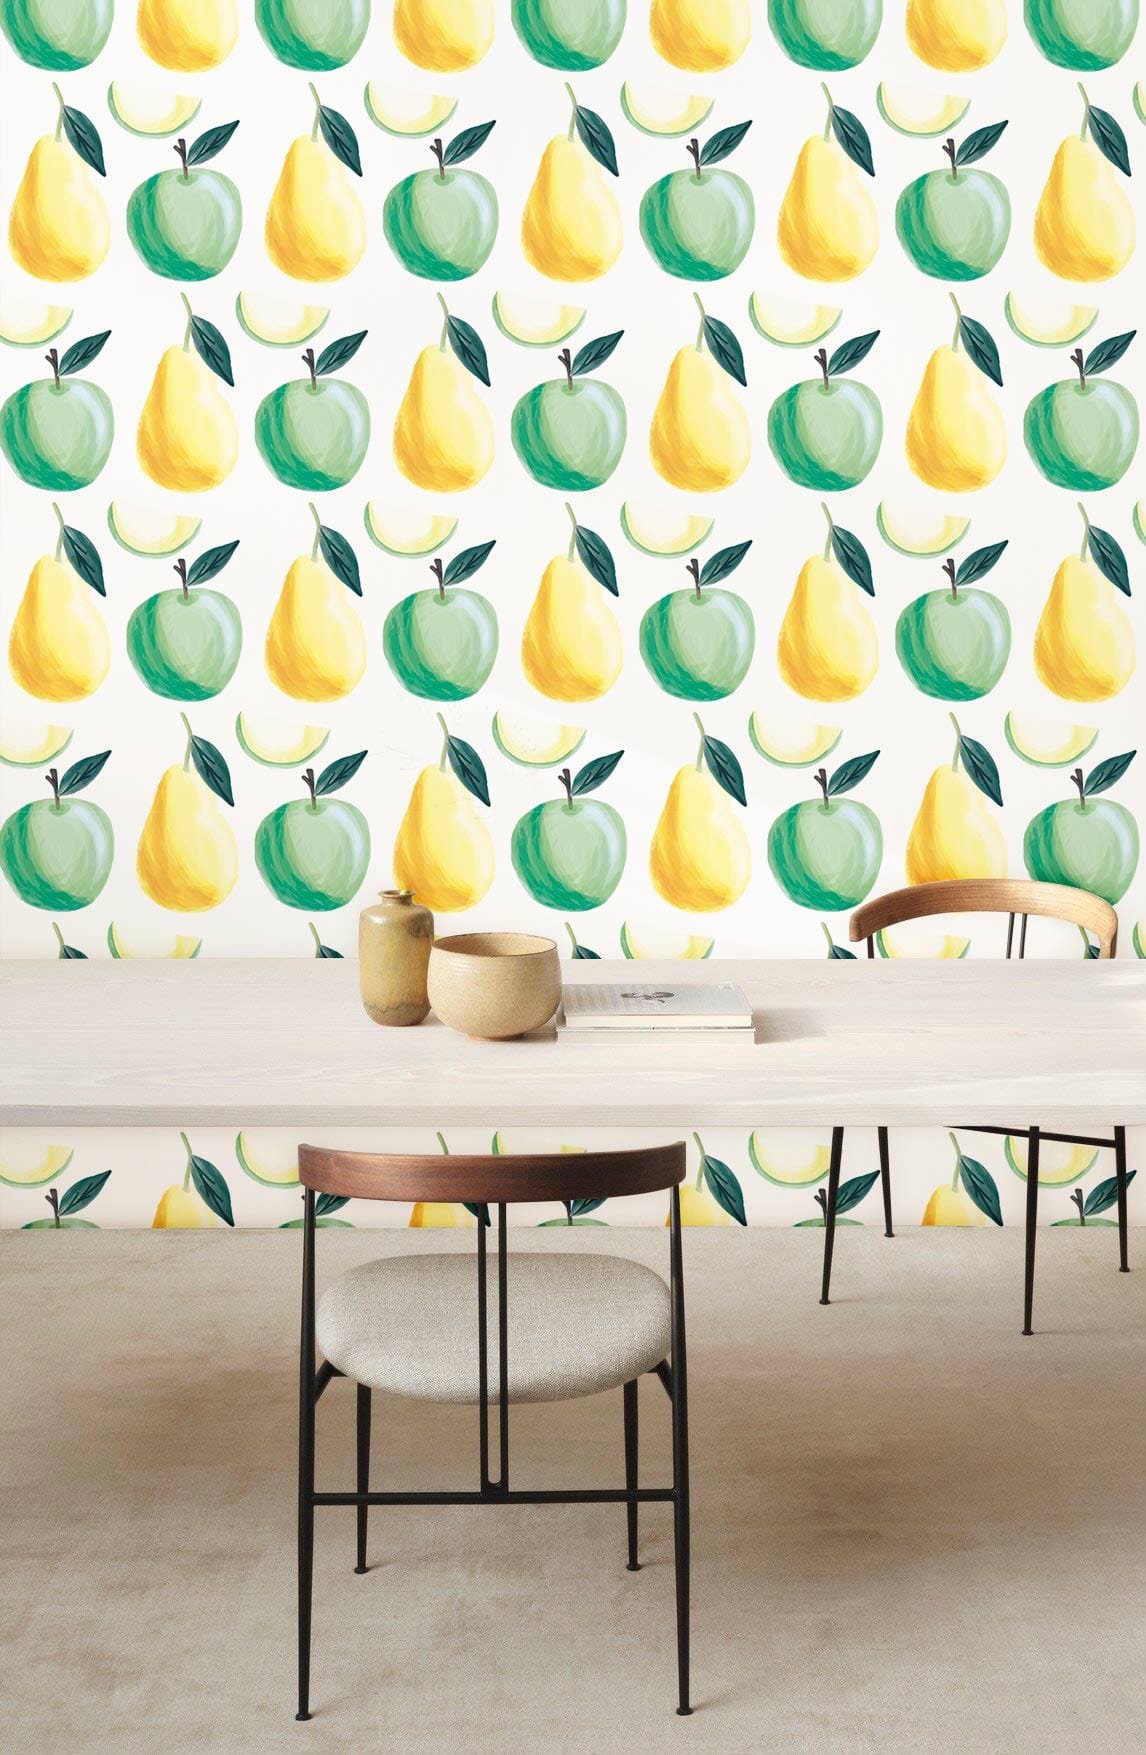 Sketched Apples and Pears Wallpaper Mural for dining Room